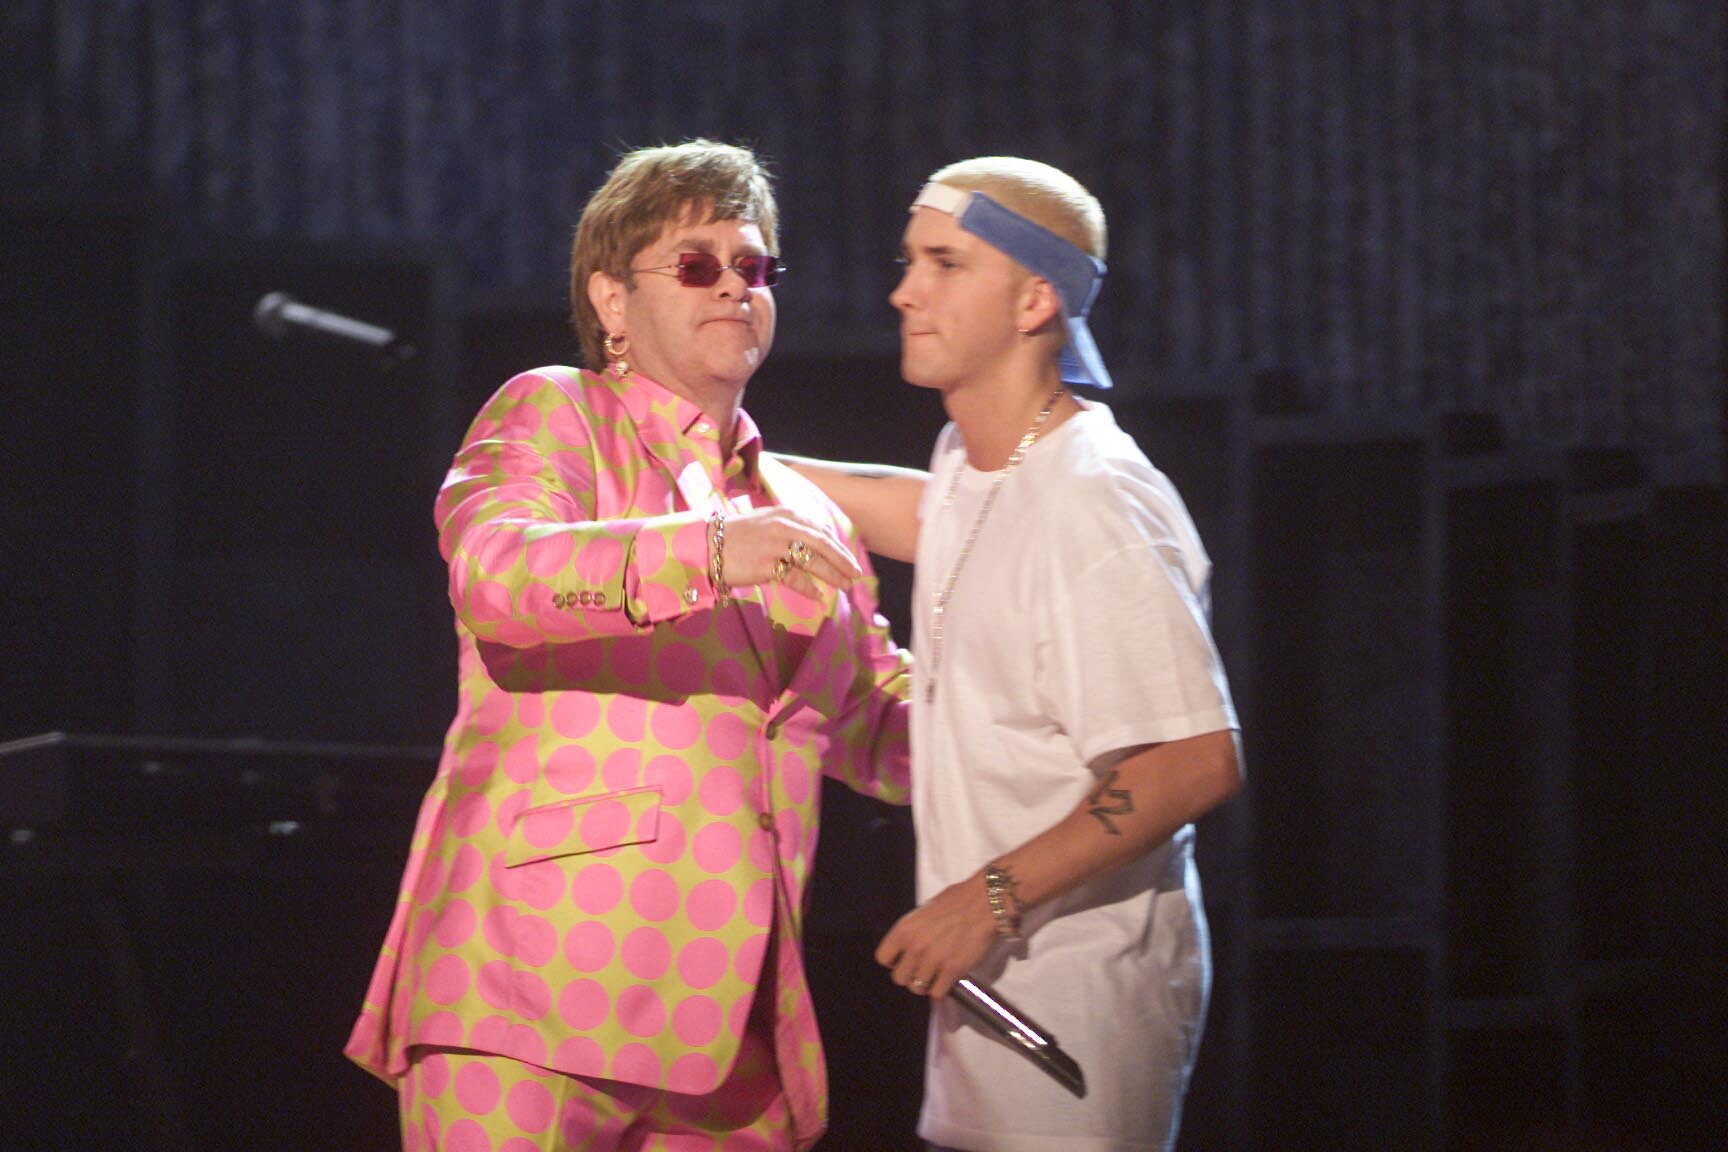 LOS ANGELES, CALIFORNIA - FEBRUARY 21: Pop legend Elton John performs with rapper Eminem at the 43rd Grammy Awards on February 21, 2001 in Los Angeles, California, USA. Eminem was nominated in the catergory for Album of the Year and won three awards for Rap Solo Performance, Rap Performance by a Duo or Group and Rap Album. (Photo by Dave Hogan/Getty Images)